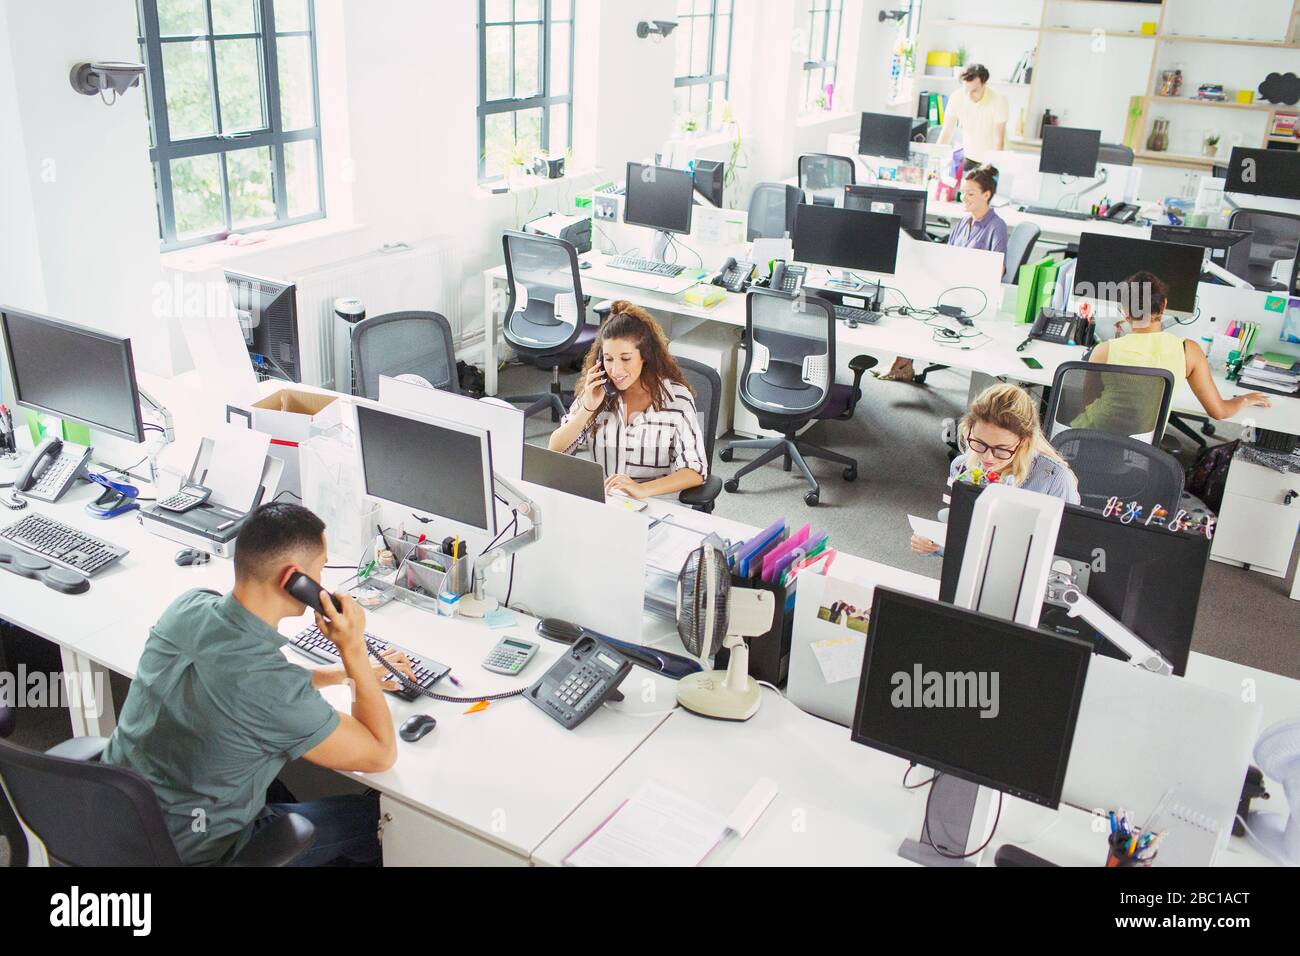 Business people working at desks in open plan office Stock Photo